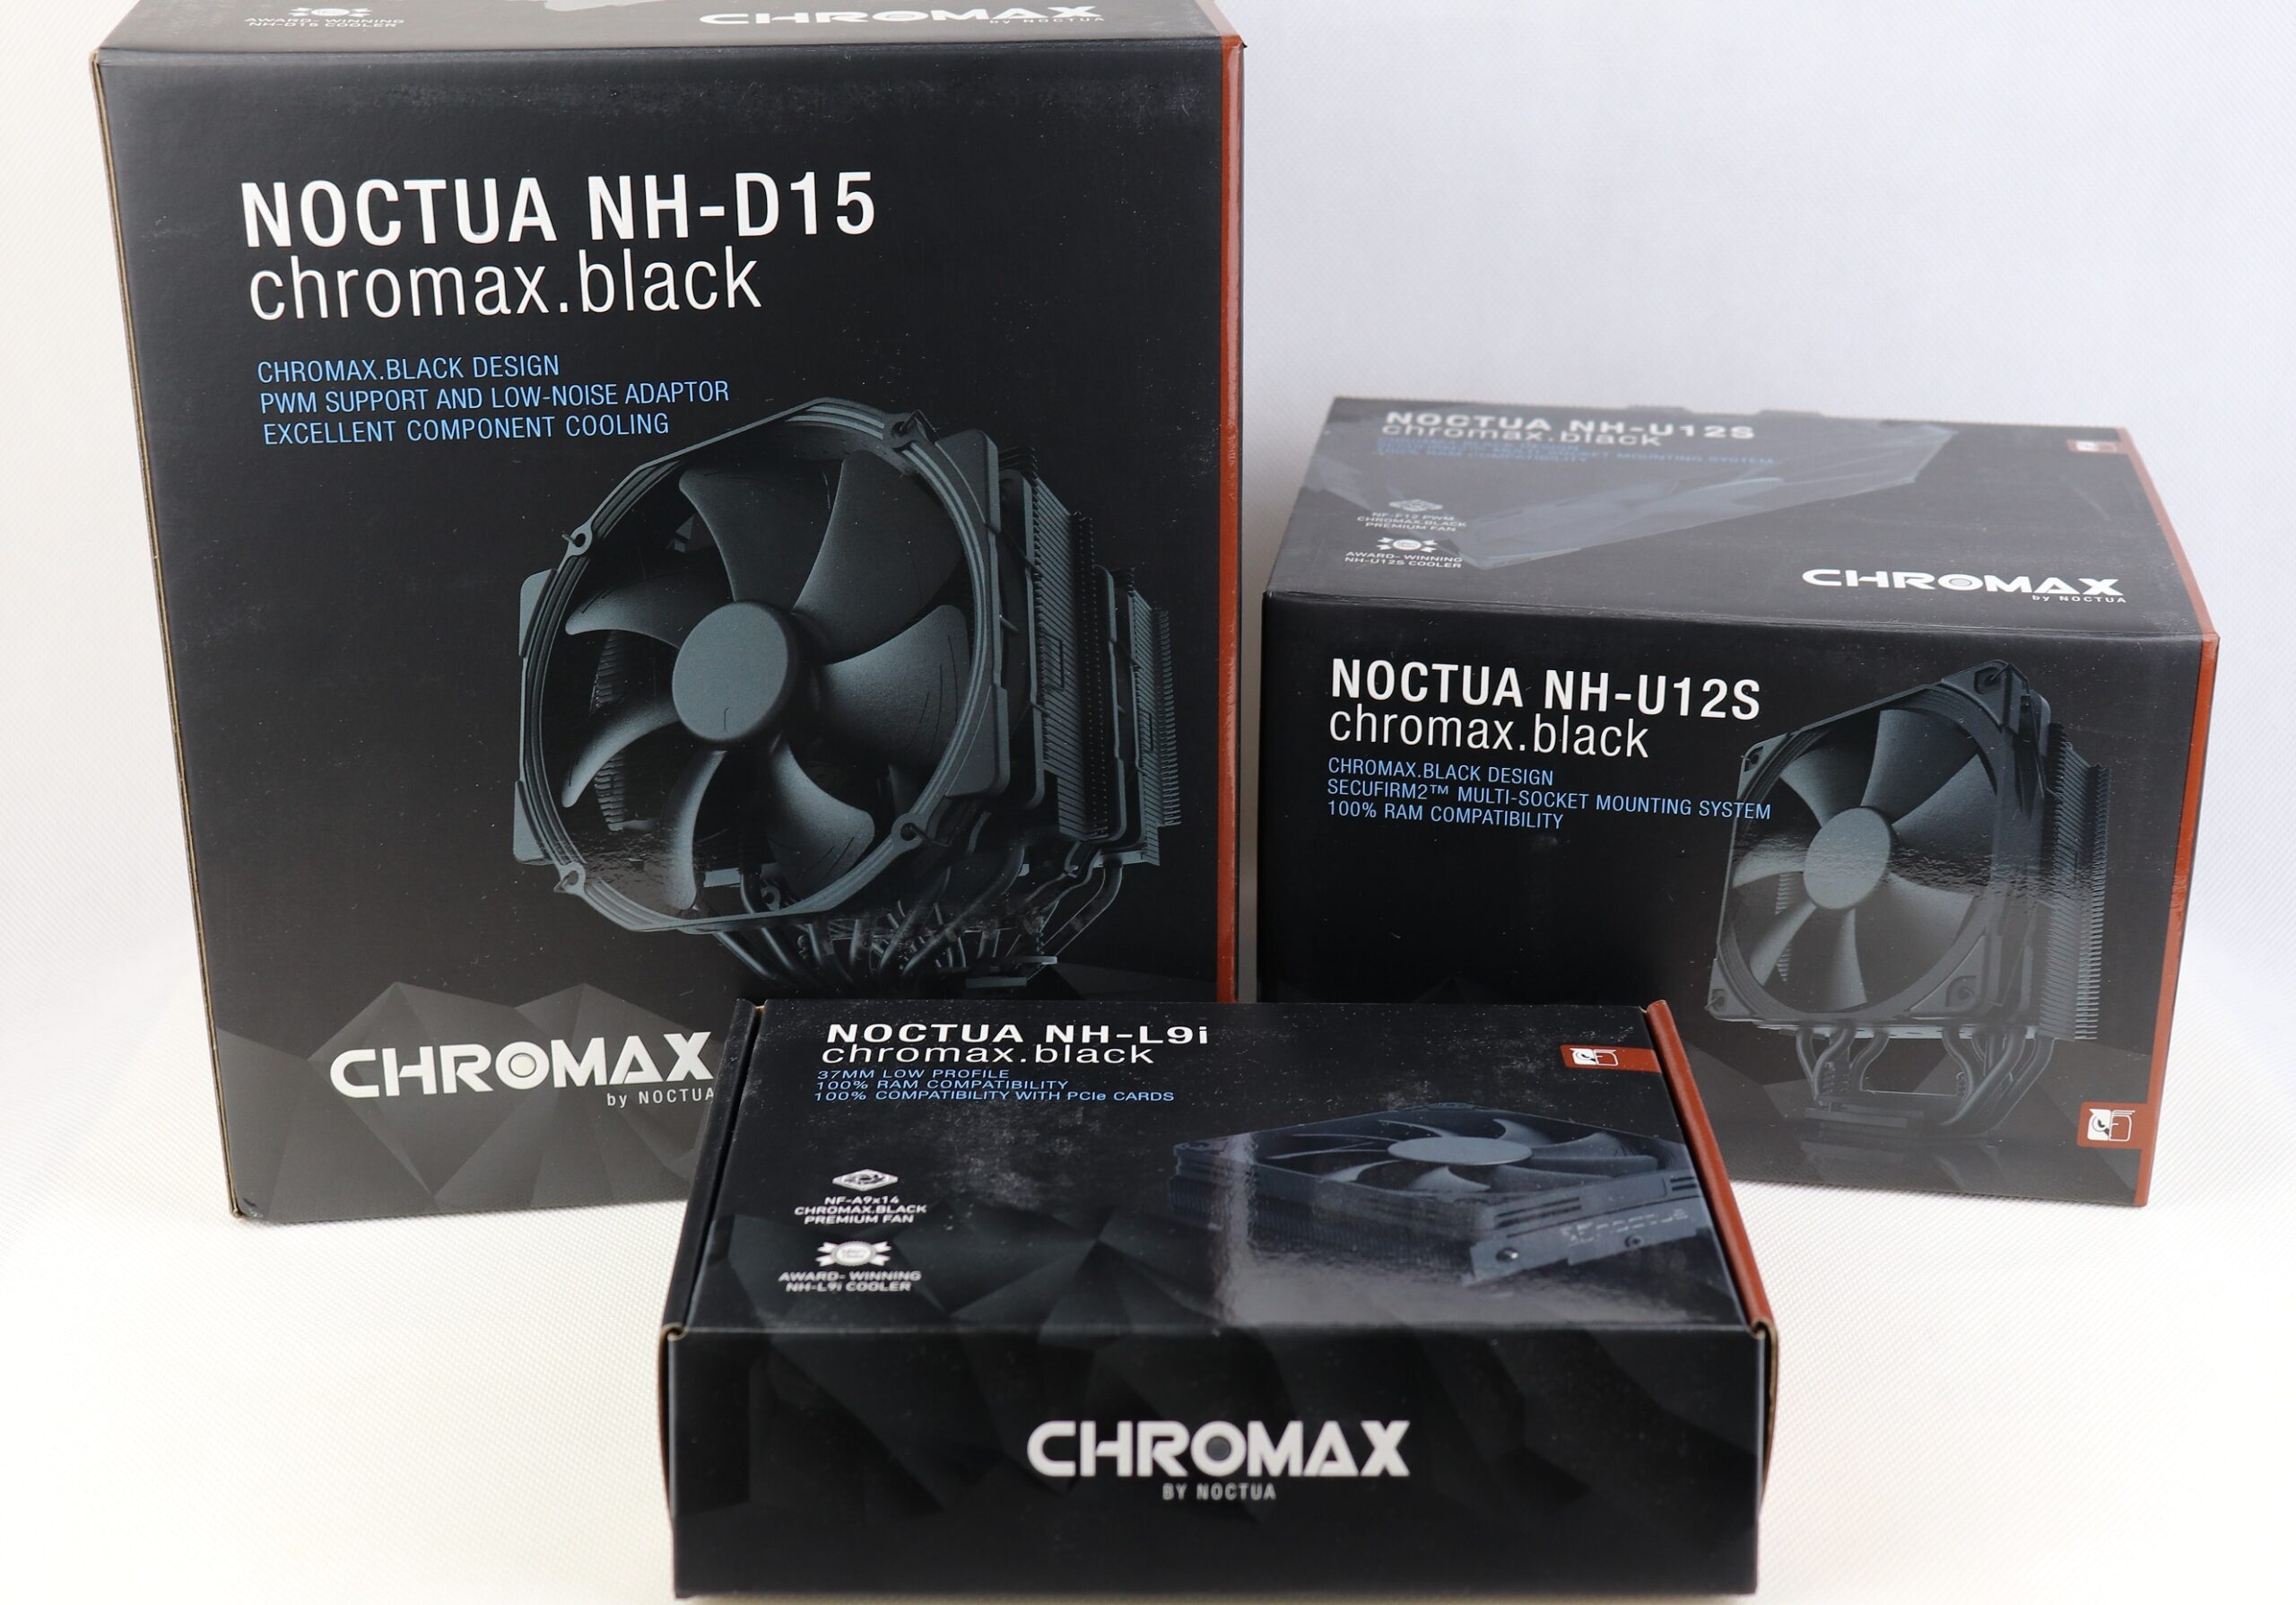 Unboxing And Review Of Noctua Chromax Black Cpu Coolers Nh L9i Nh U12s Nh D15 Unbxtech